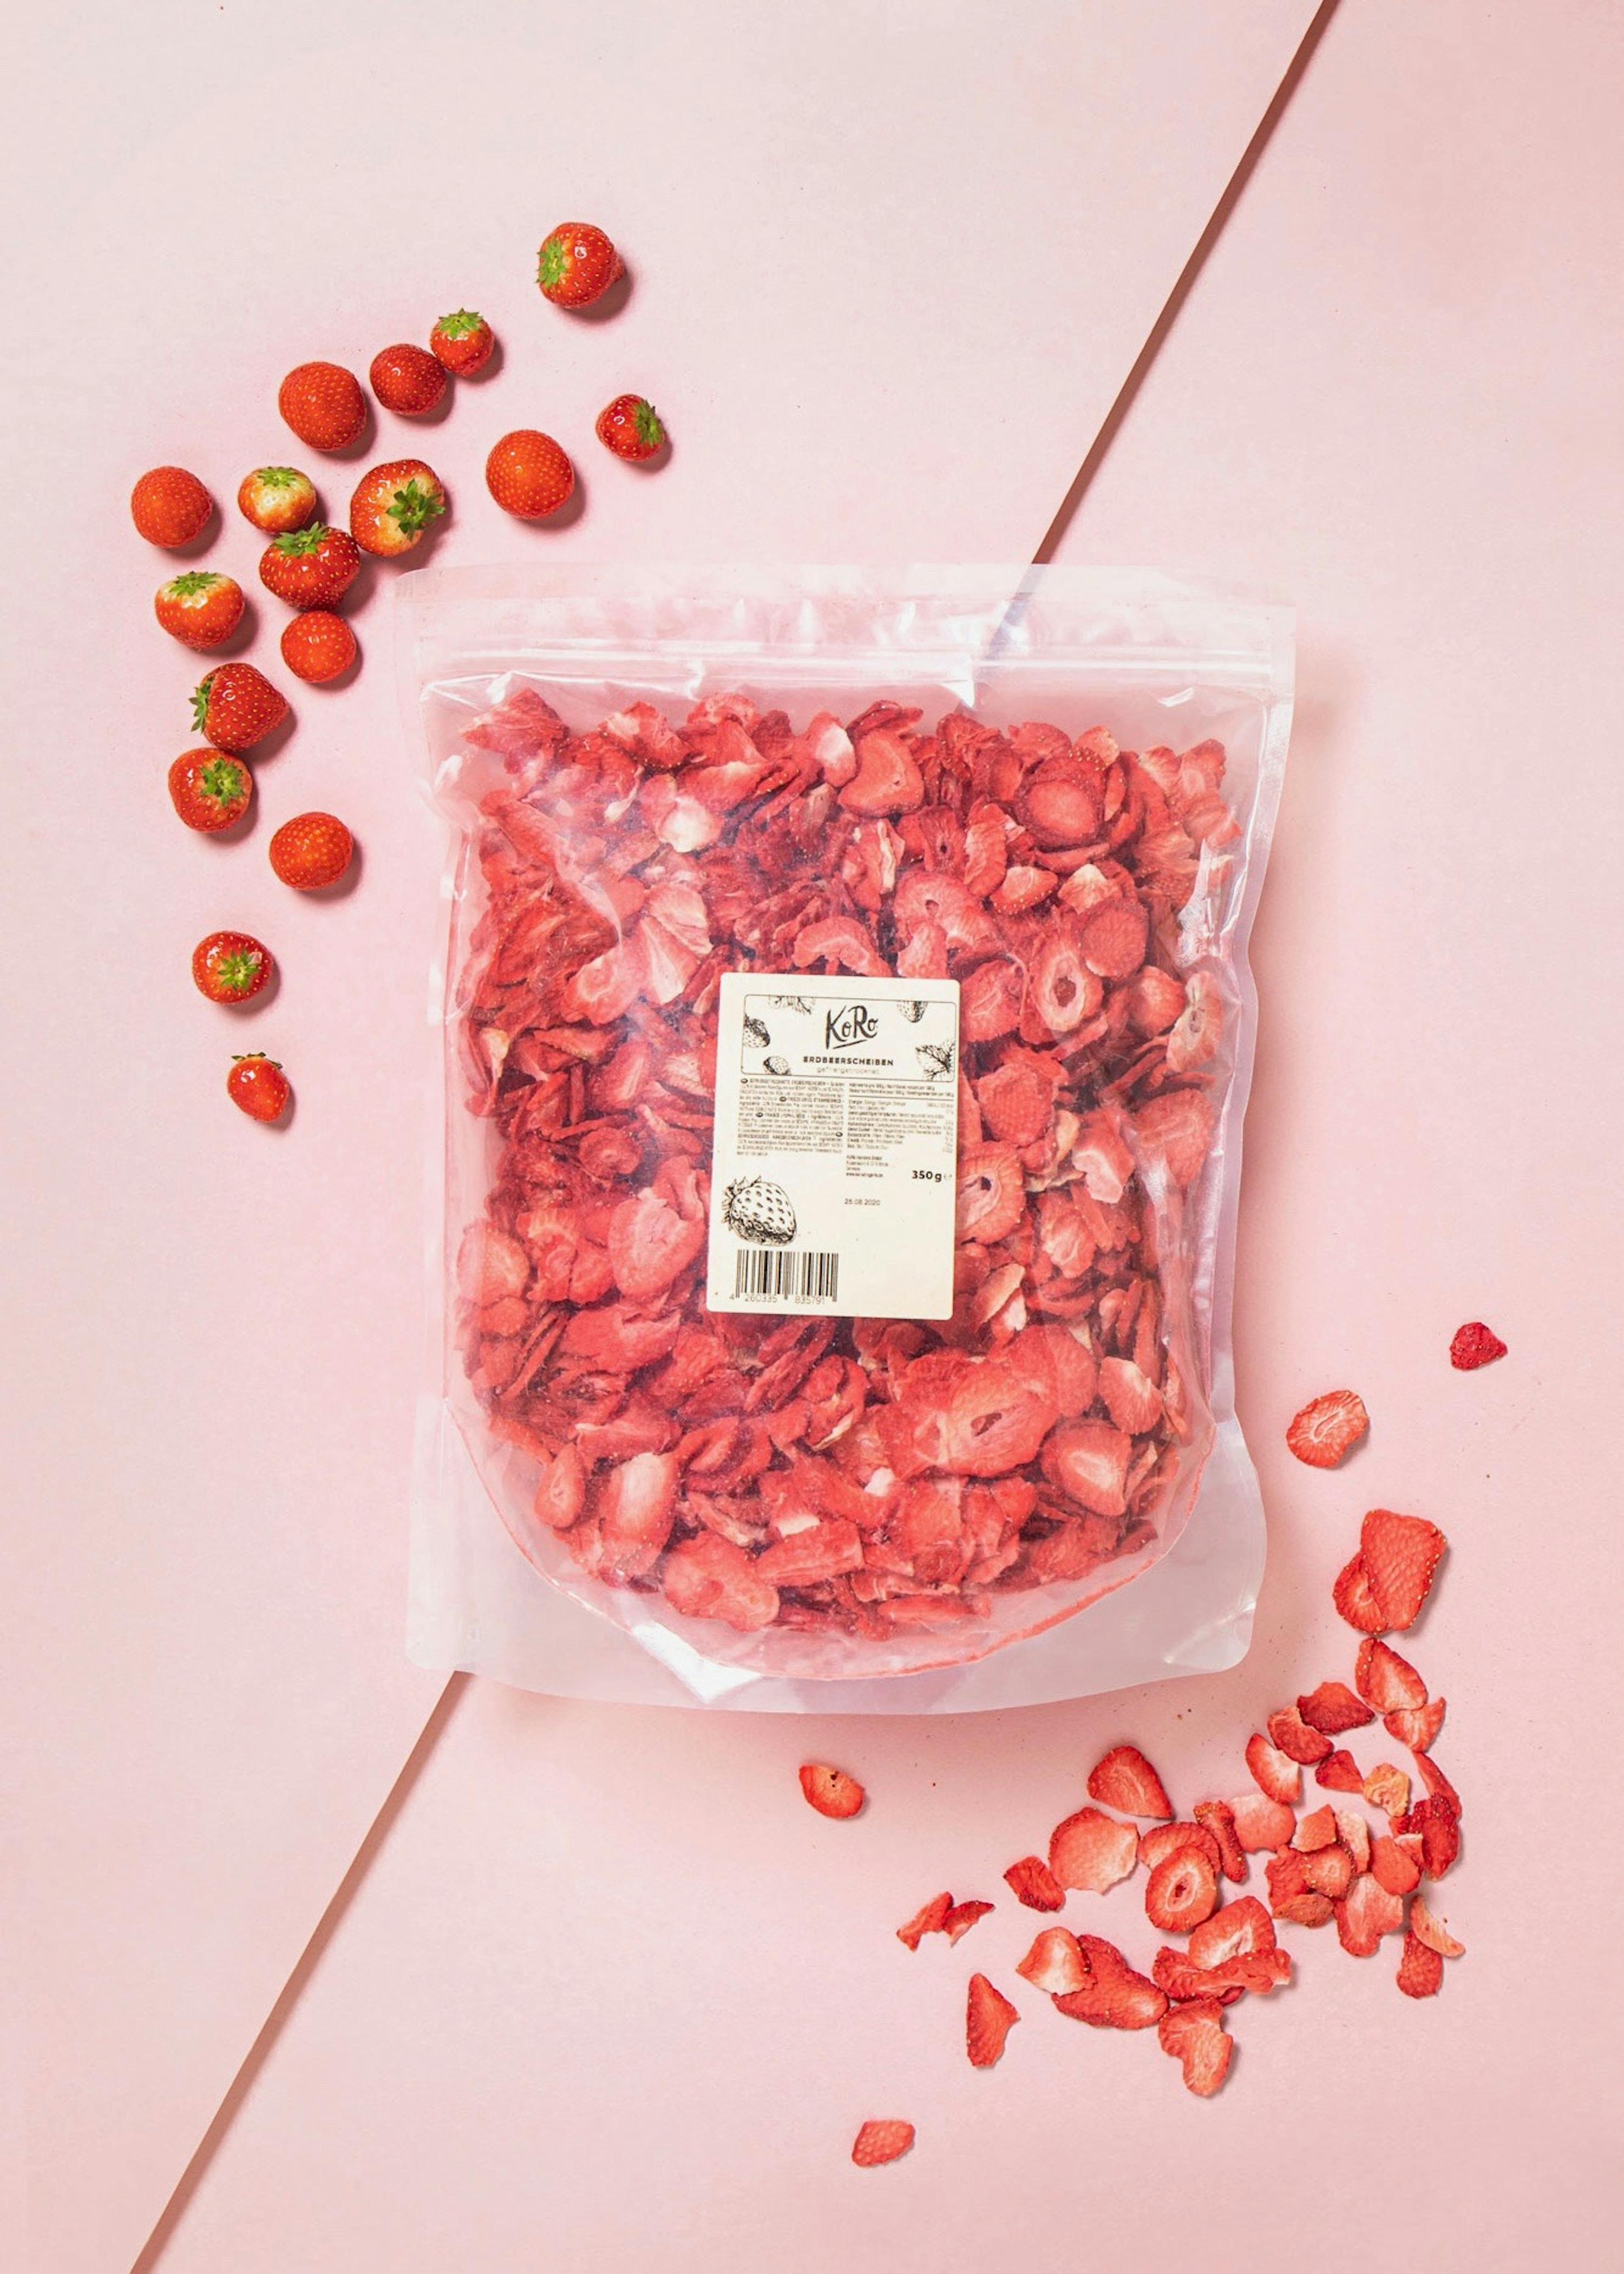 Koro Freeze Dried Strawberries 350 G Gently Dried Dried Fruit 100 Natural Sweet And Intense Flavoring